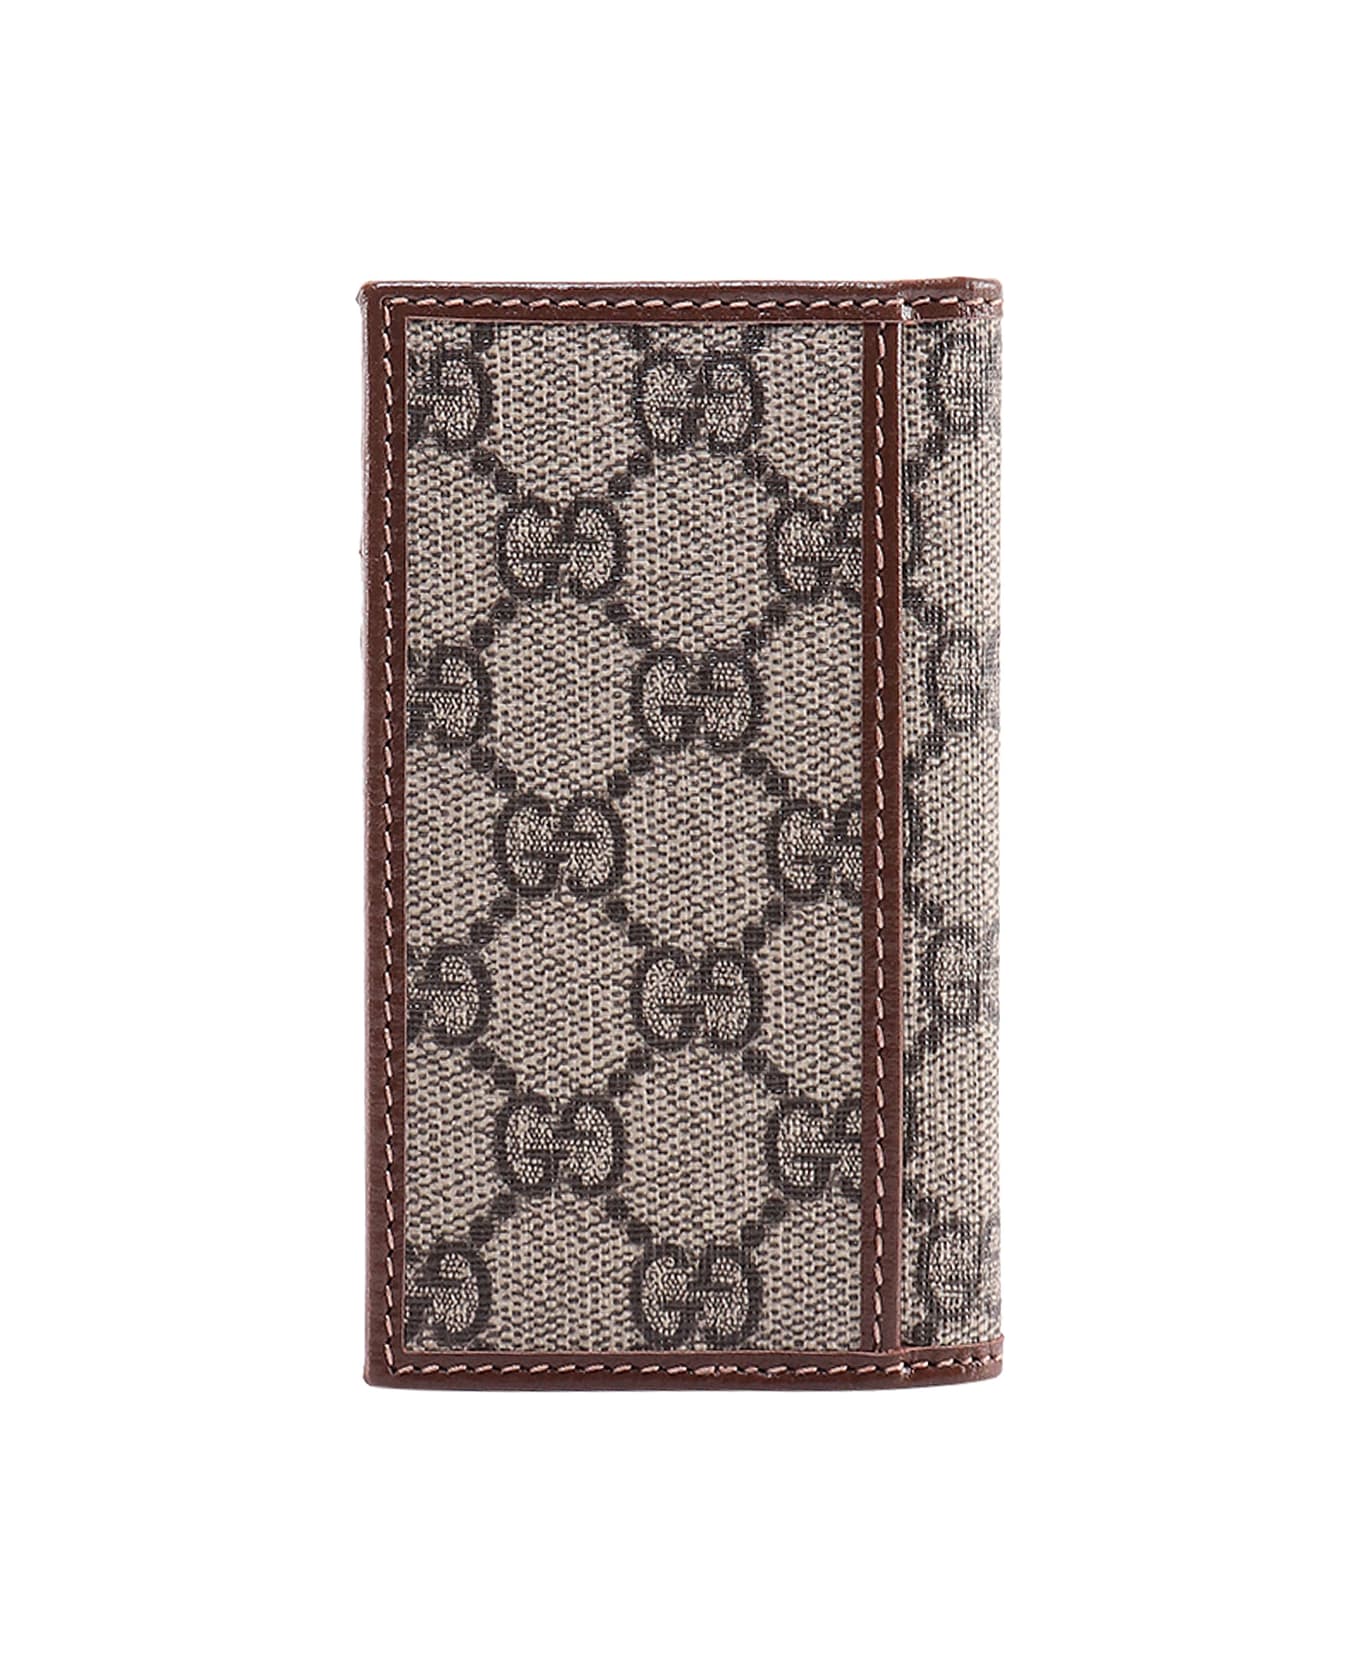 Gucci Card Holder - Brown